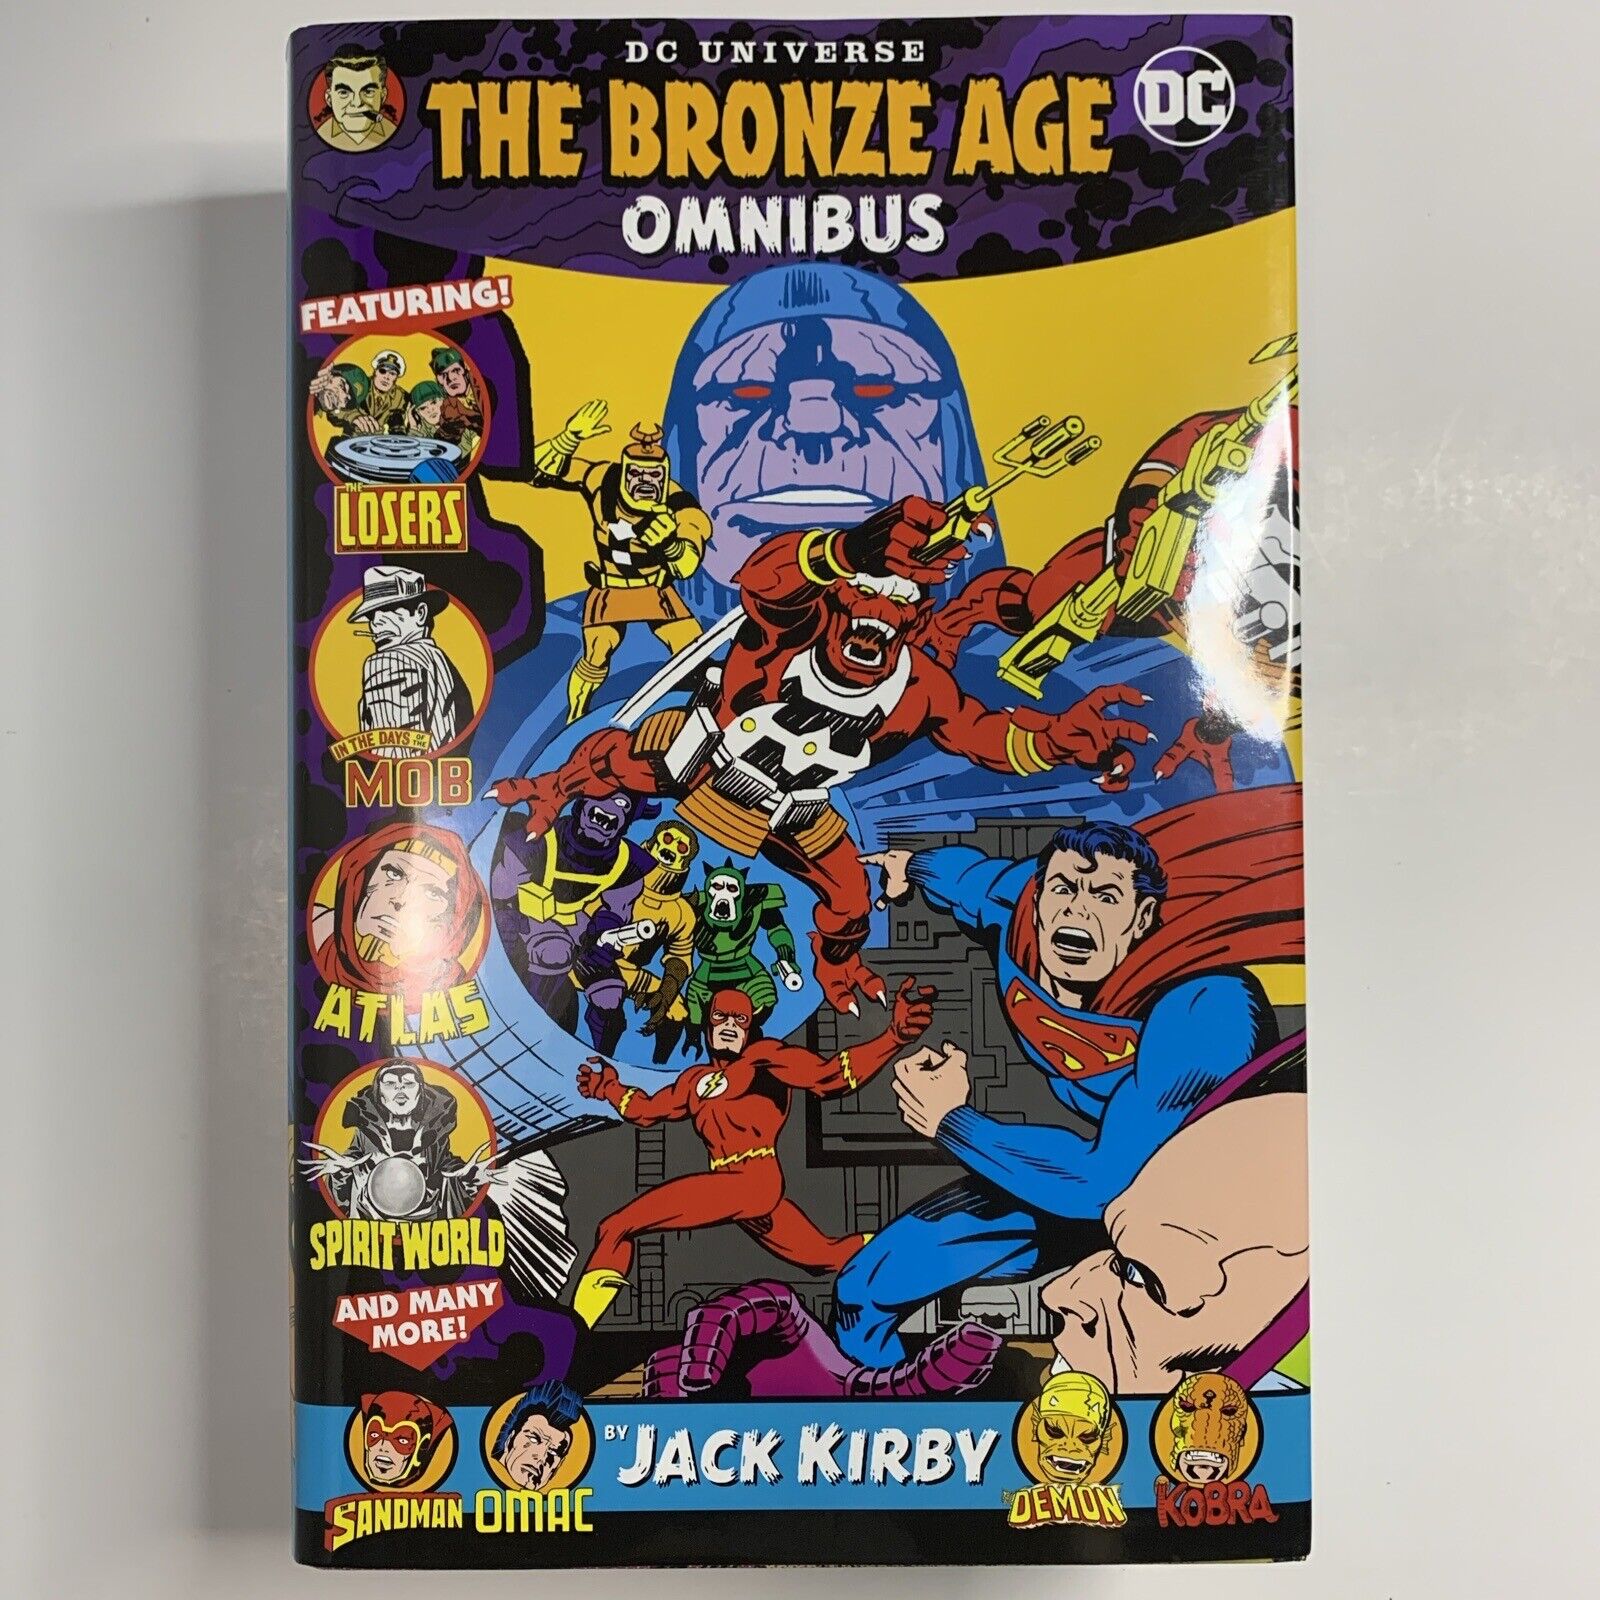 DC Universe: The Bronze Age Omnibus by Jack Kirby (DC Comics, Hardcover, 2019)